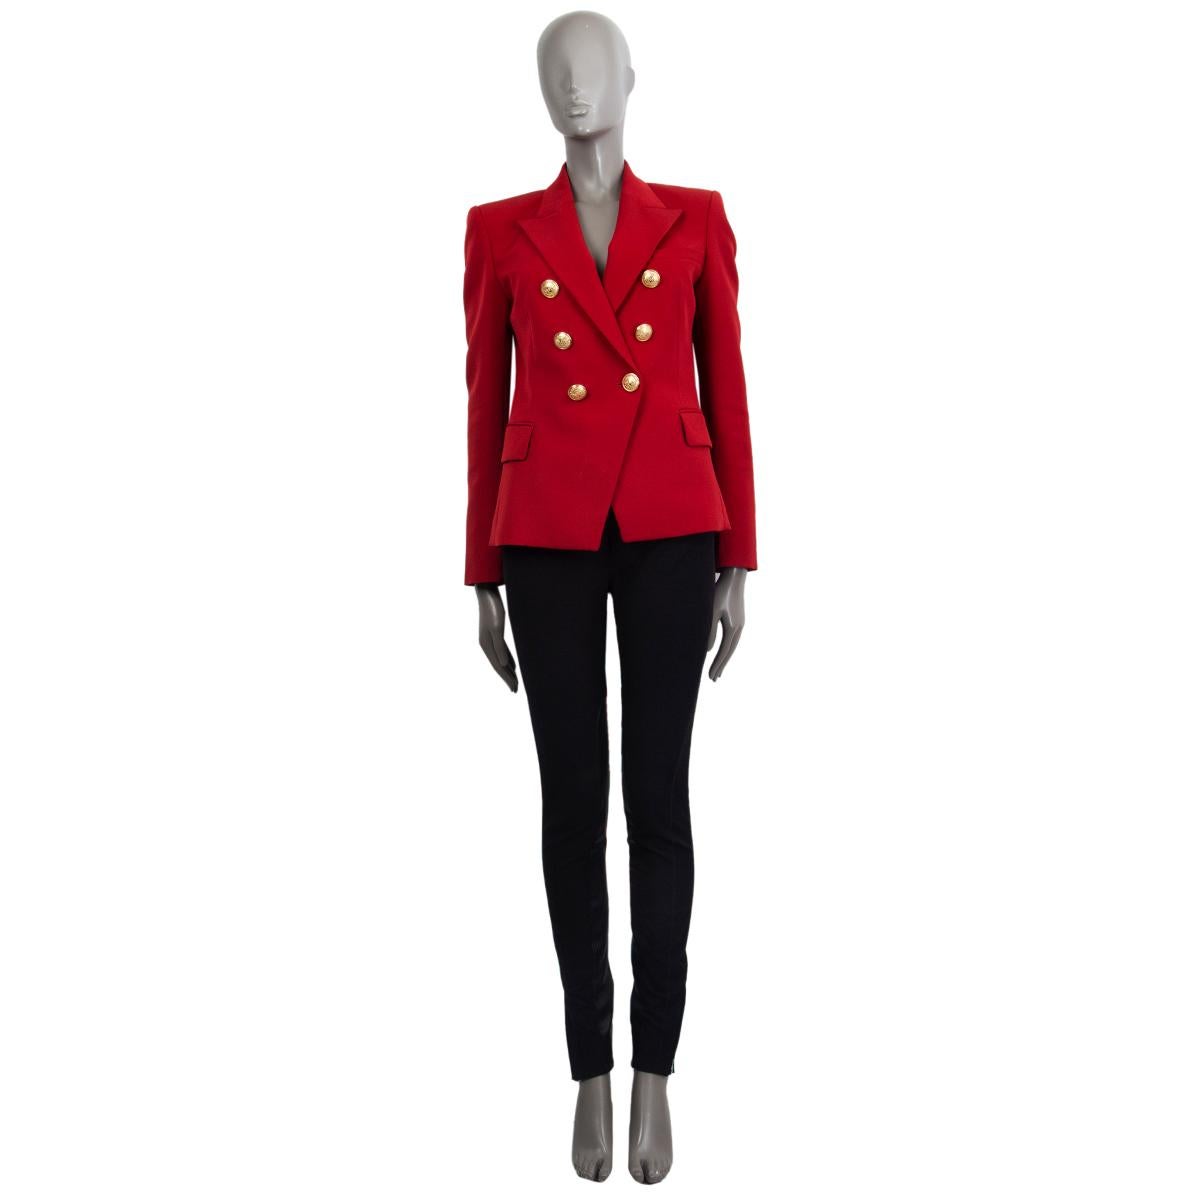 Balmain signature double-breasted blazer in deep red wool (100%) with a slim-fitting silhouette, one patch pocket on the chest, two flap pockets and buttoned cuffs at the back. Closes with embosses logo gold-tone buttons in the front. Lined in black